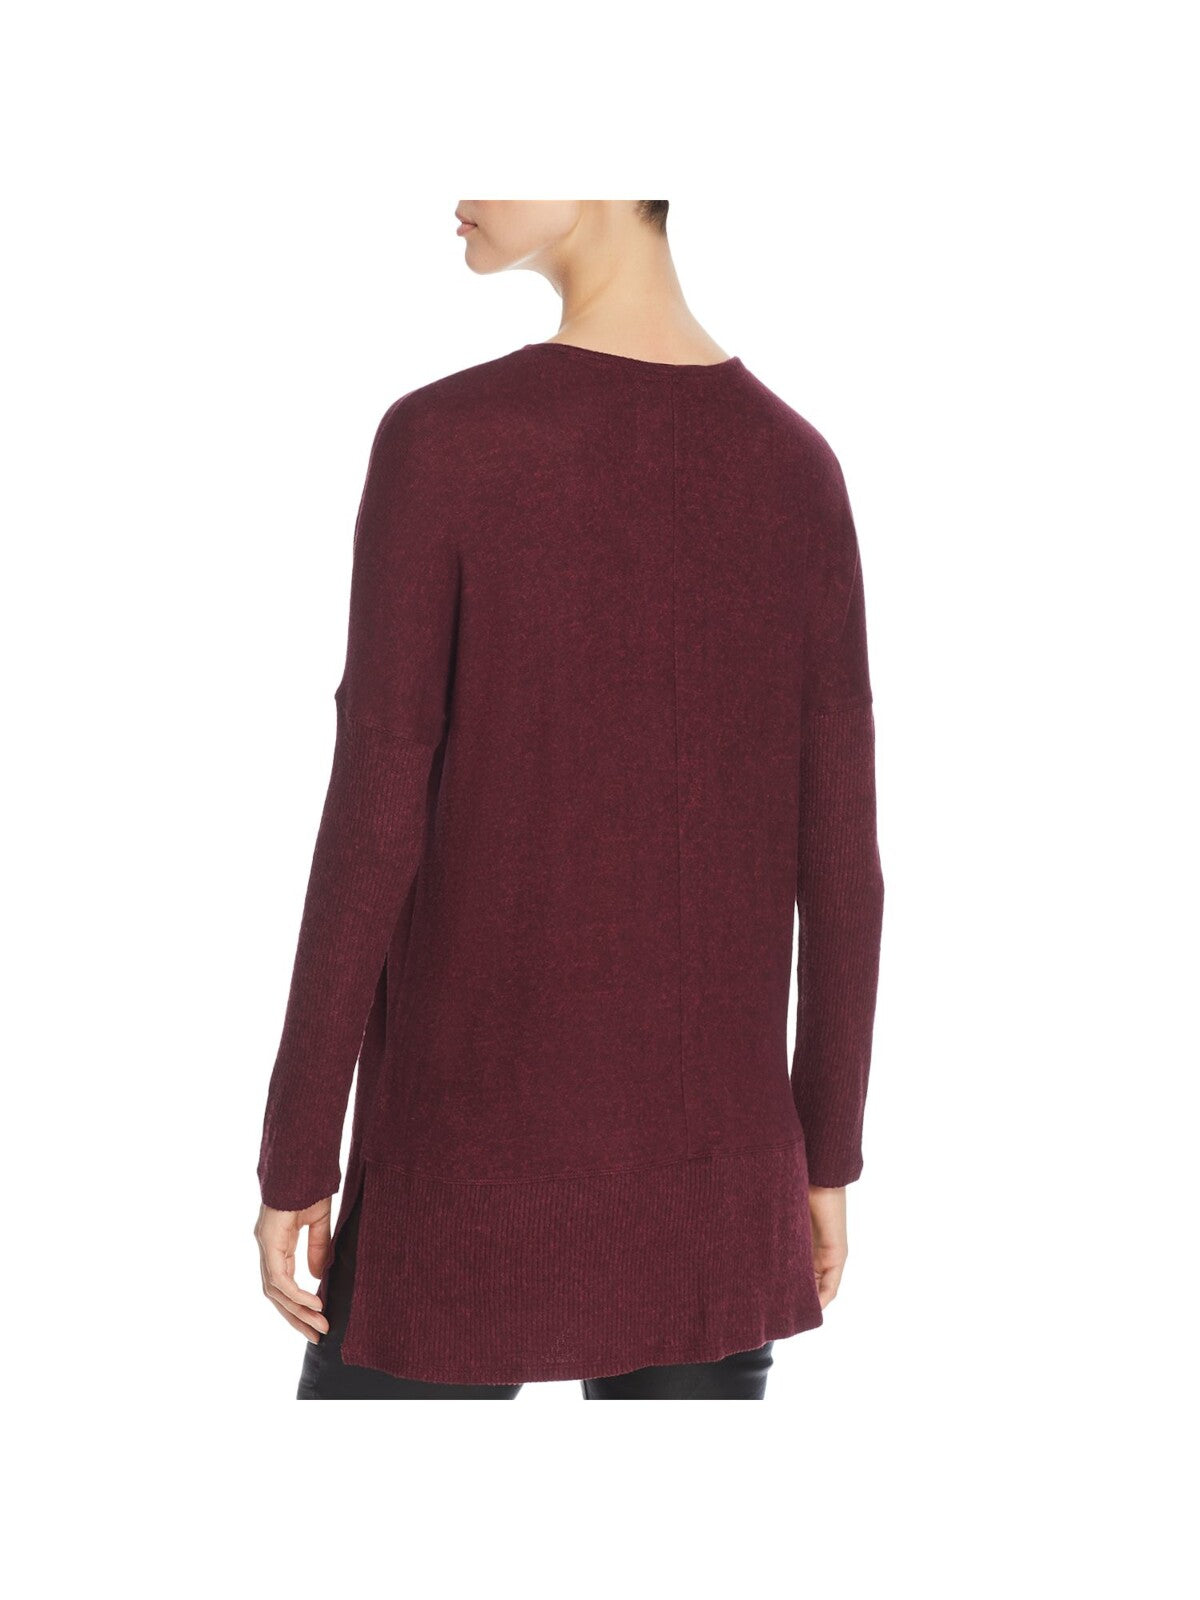 CUPIO BLUSH Womens Burgundy Stretch Ribbed Slitted Long Sleeve V Neck Wear To Work Sweater S